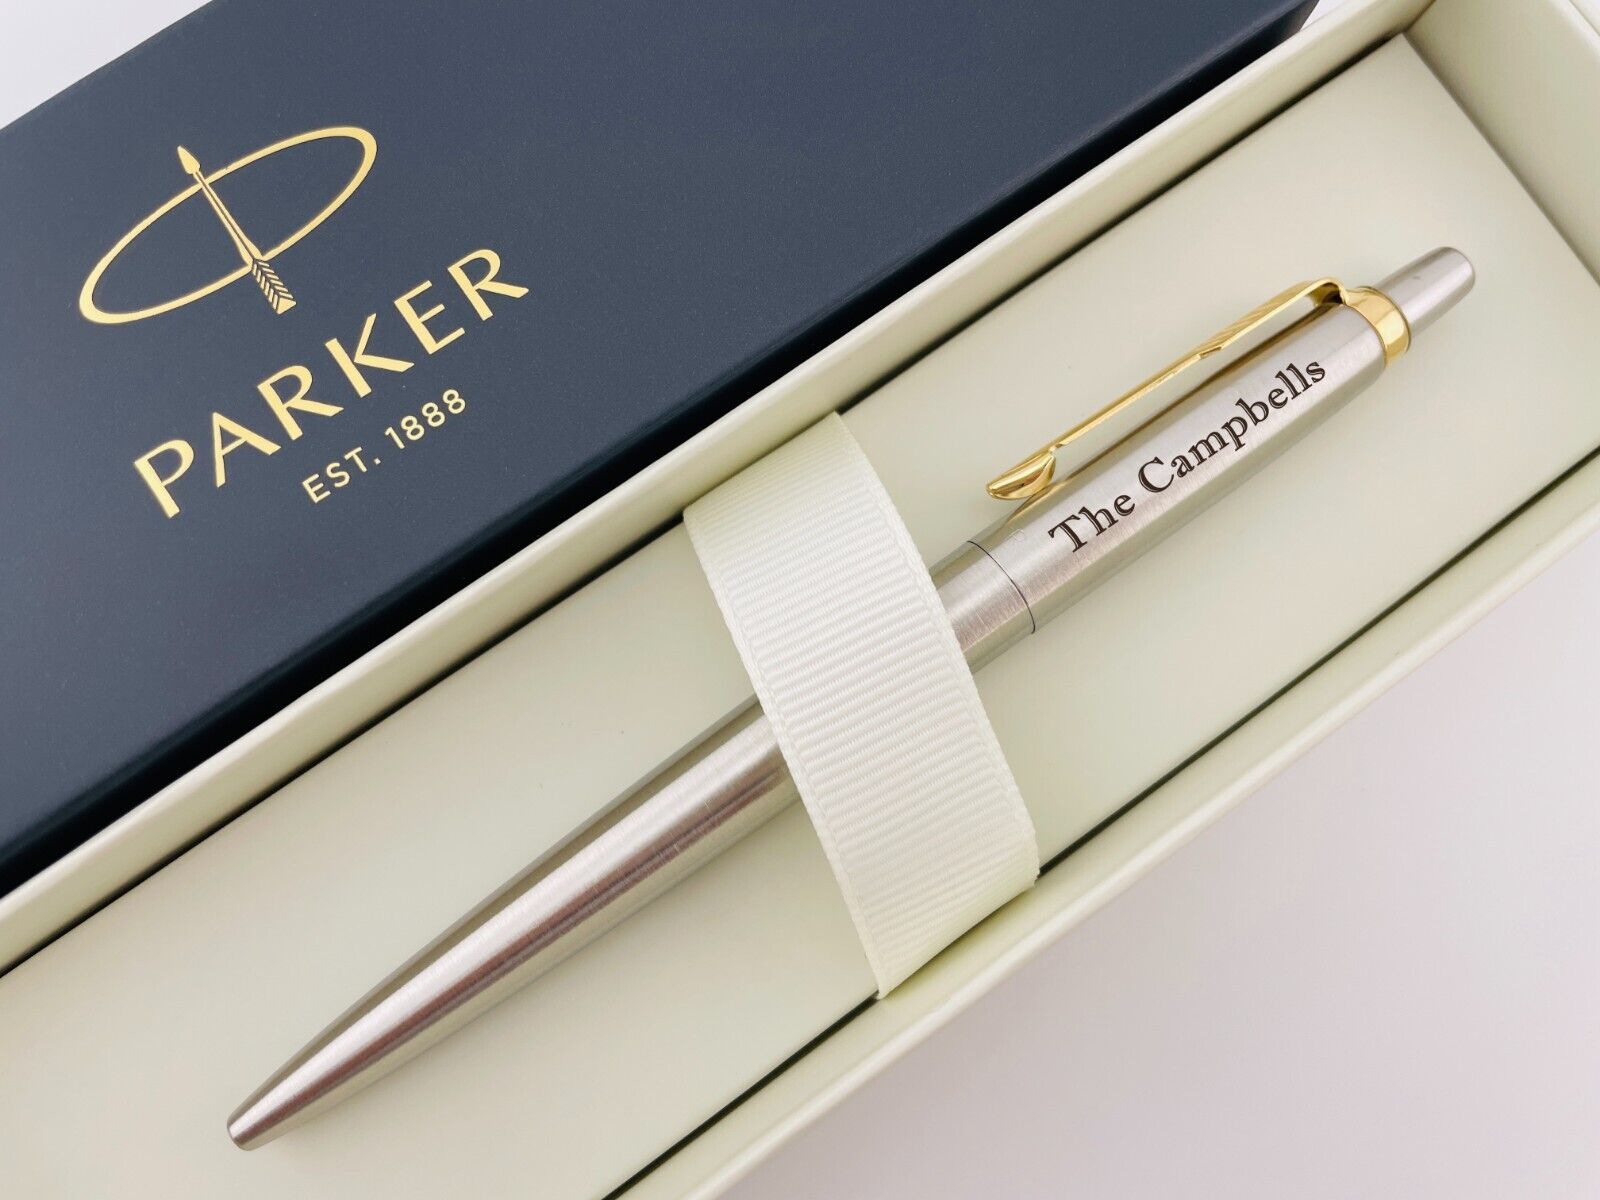 Gold Trim Parker Personalized Jotter Ballpoint Pen Blue Ink Anniversary Gift